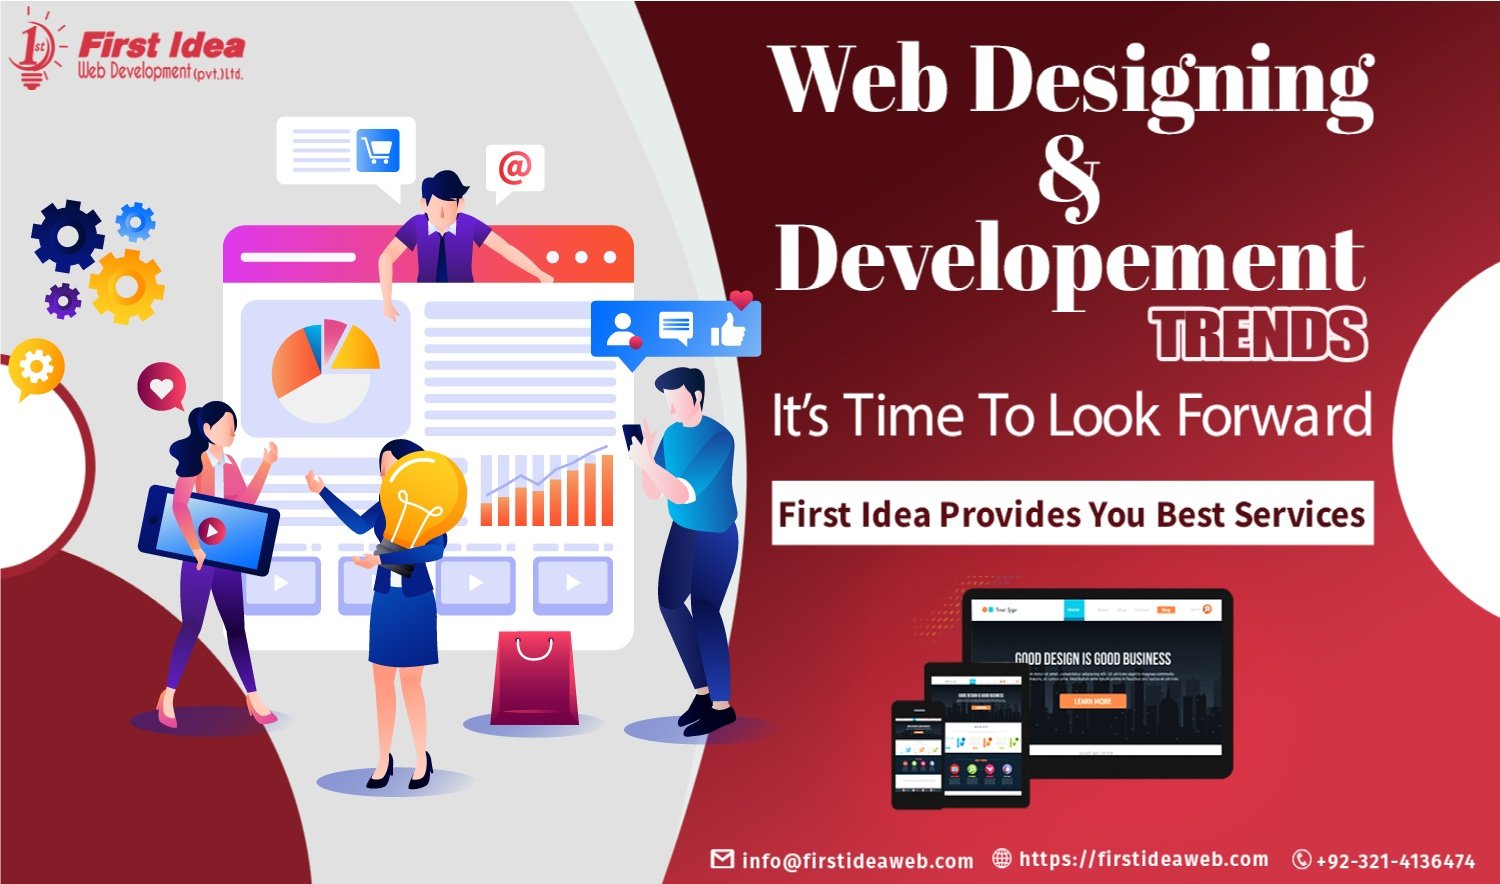 What are Website Design and Development Trends?